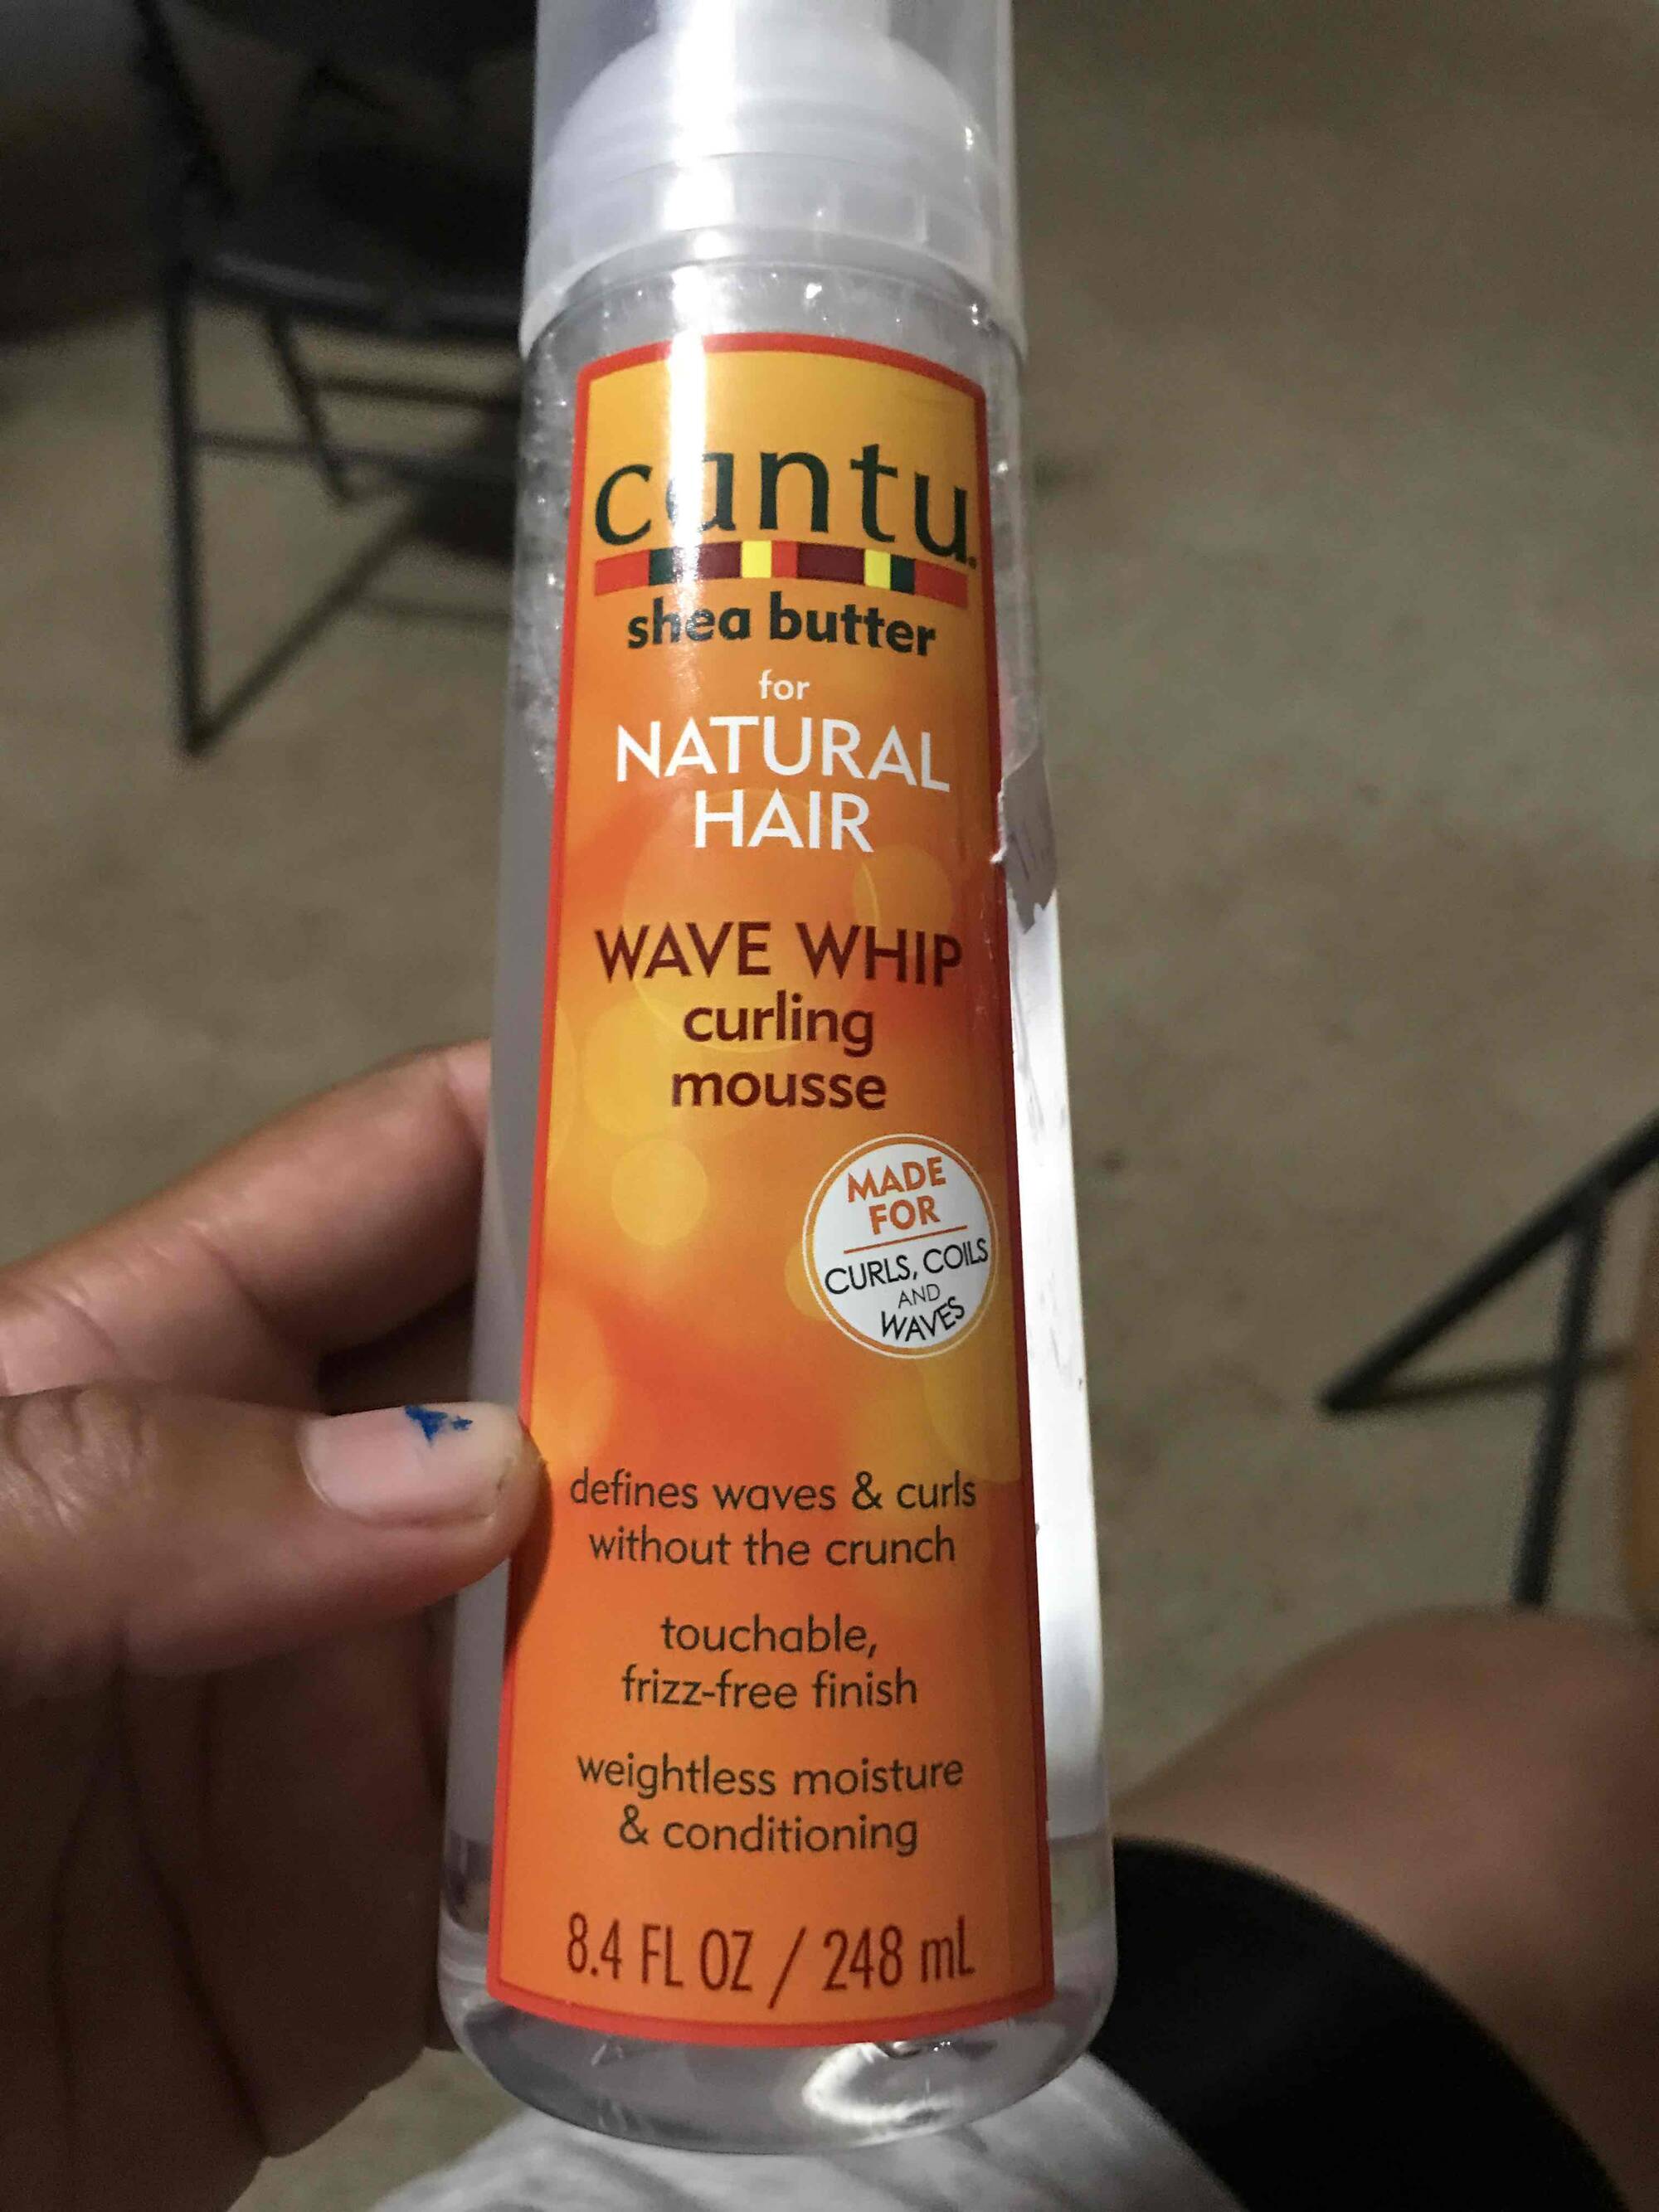 CANTU - Wave whip - Curling mousse